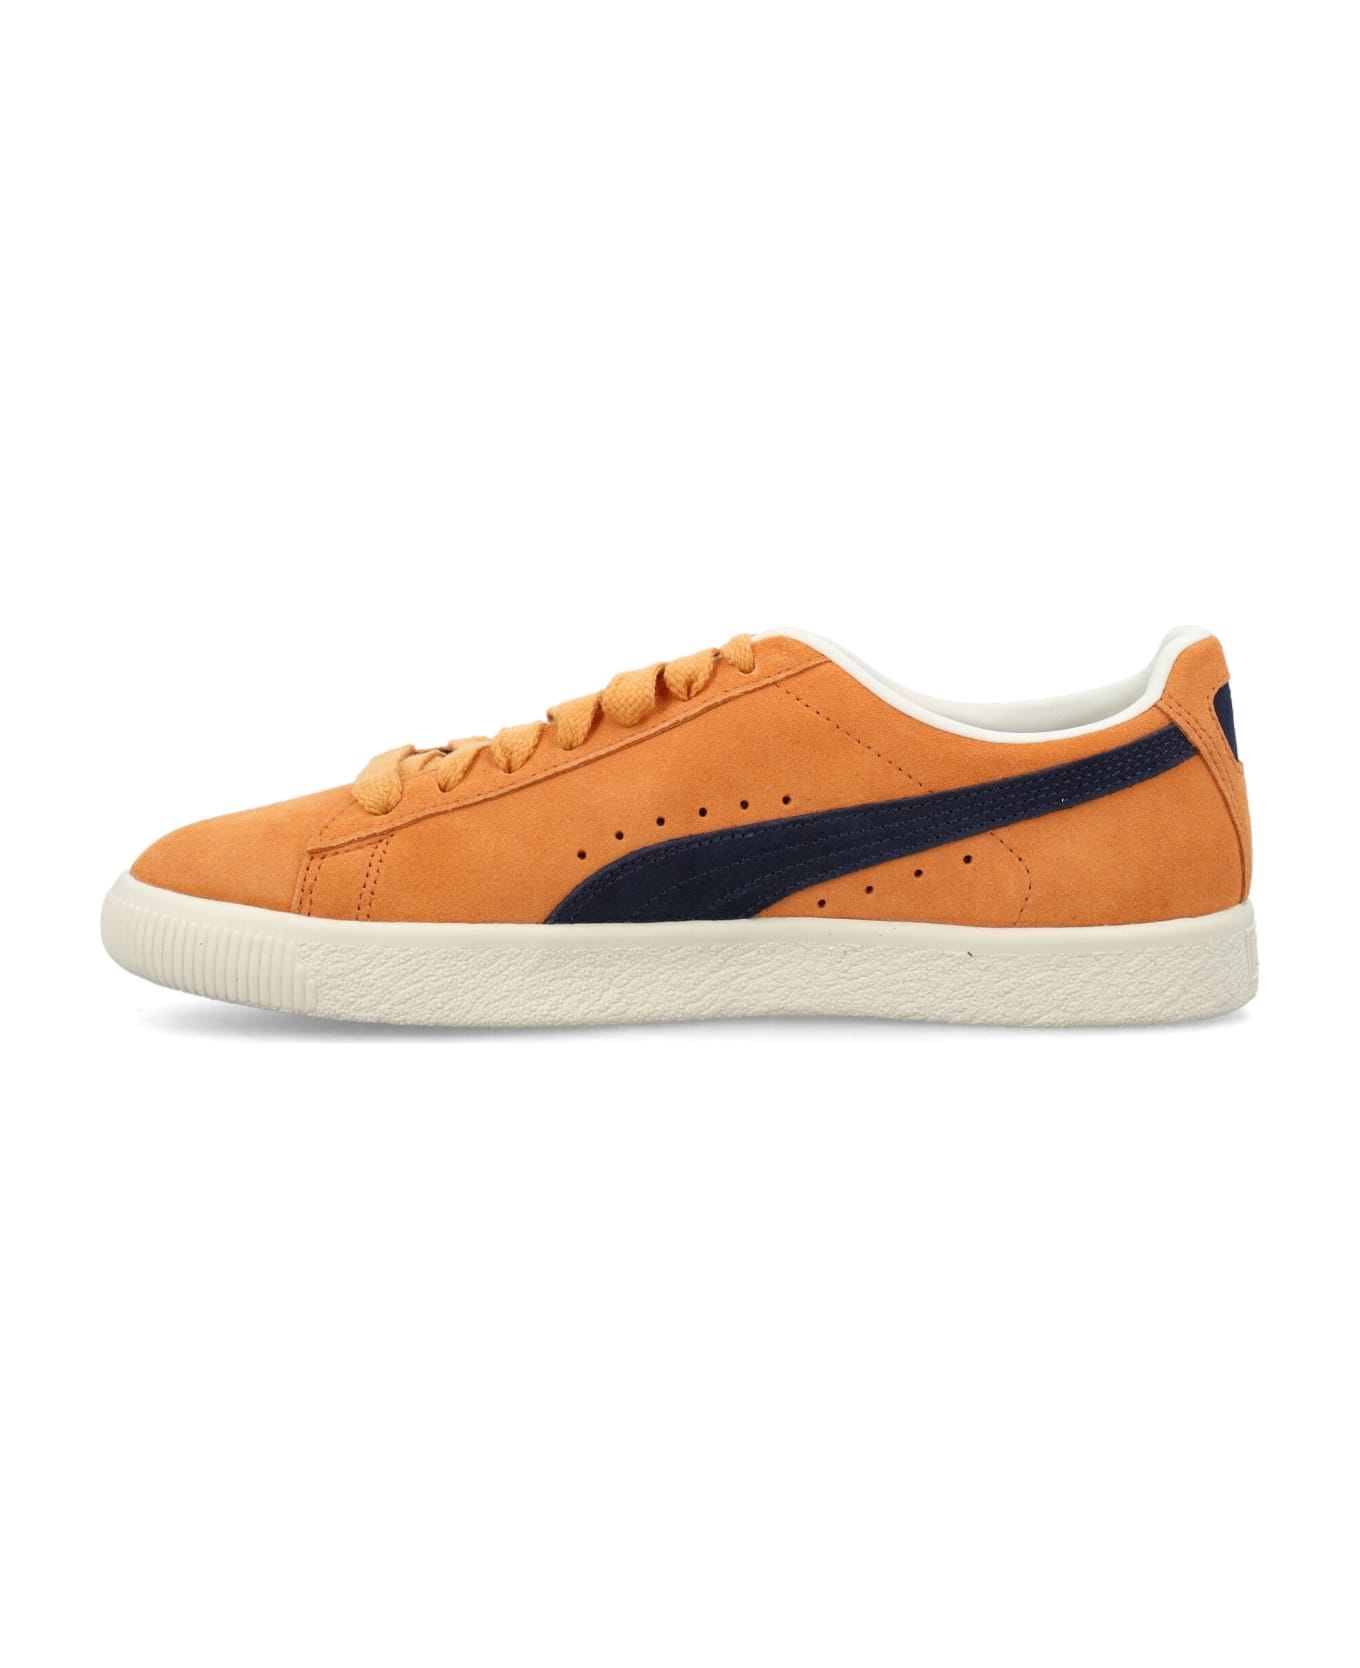 Puma Clyde Og Sneakers - CLEMENTINE NAVY